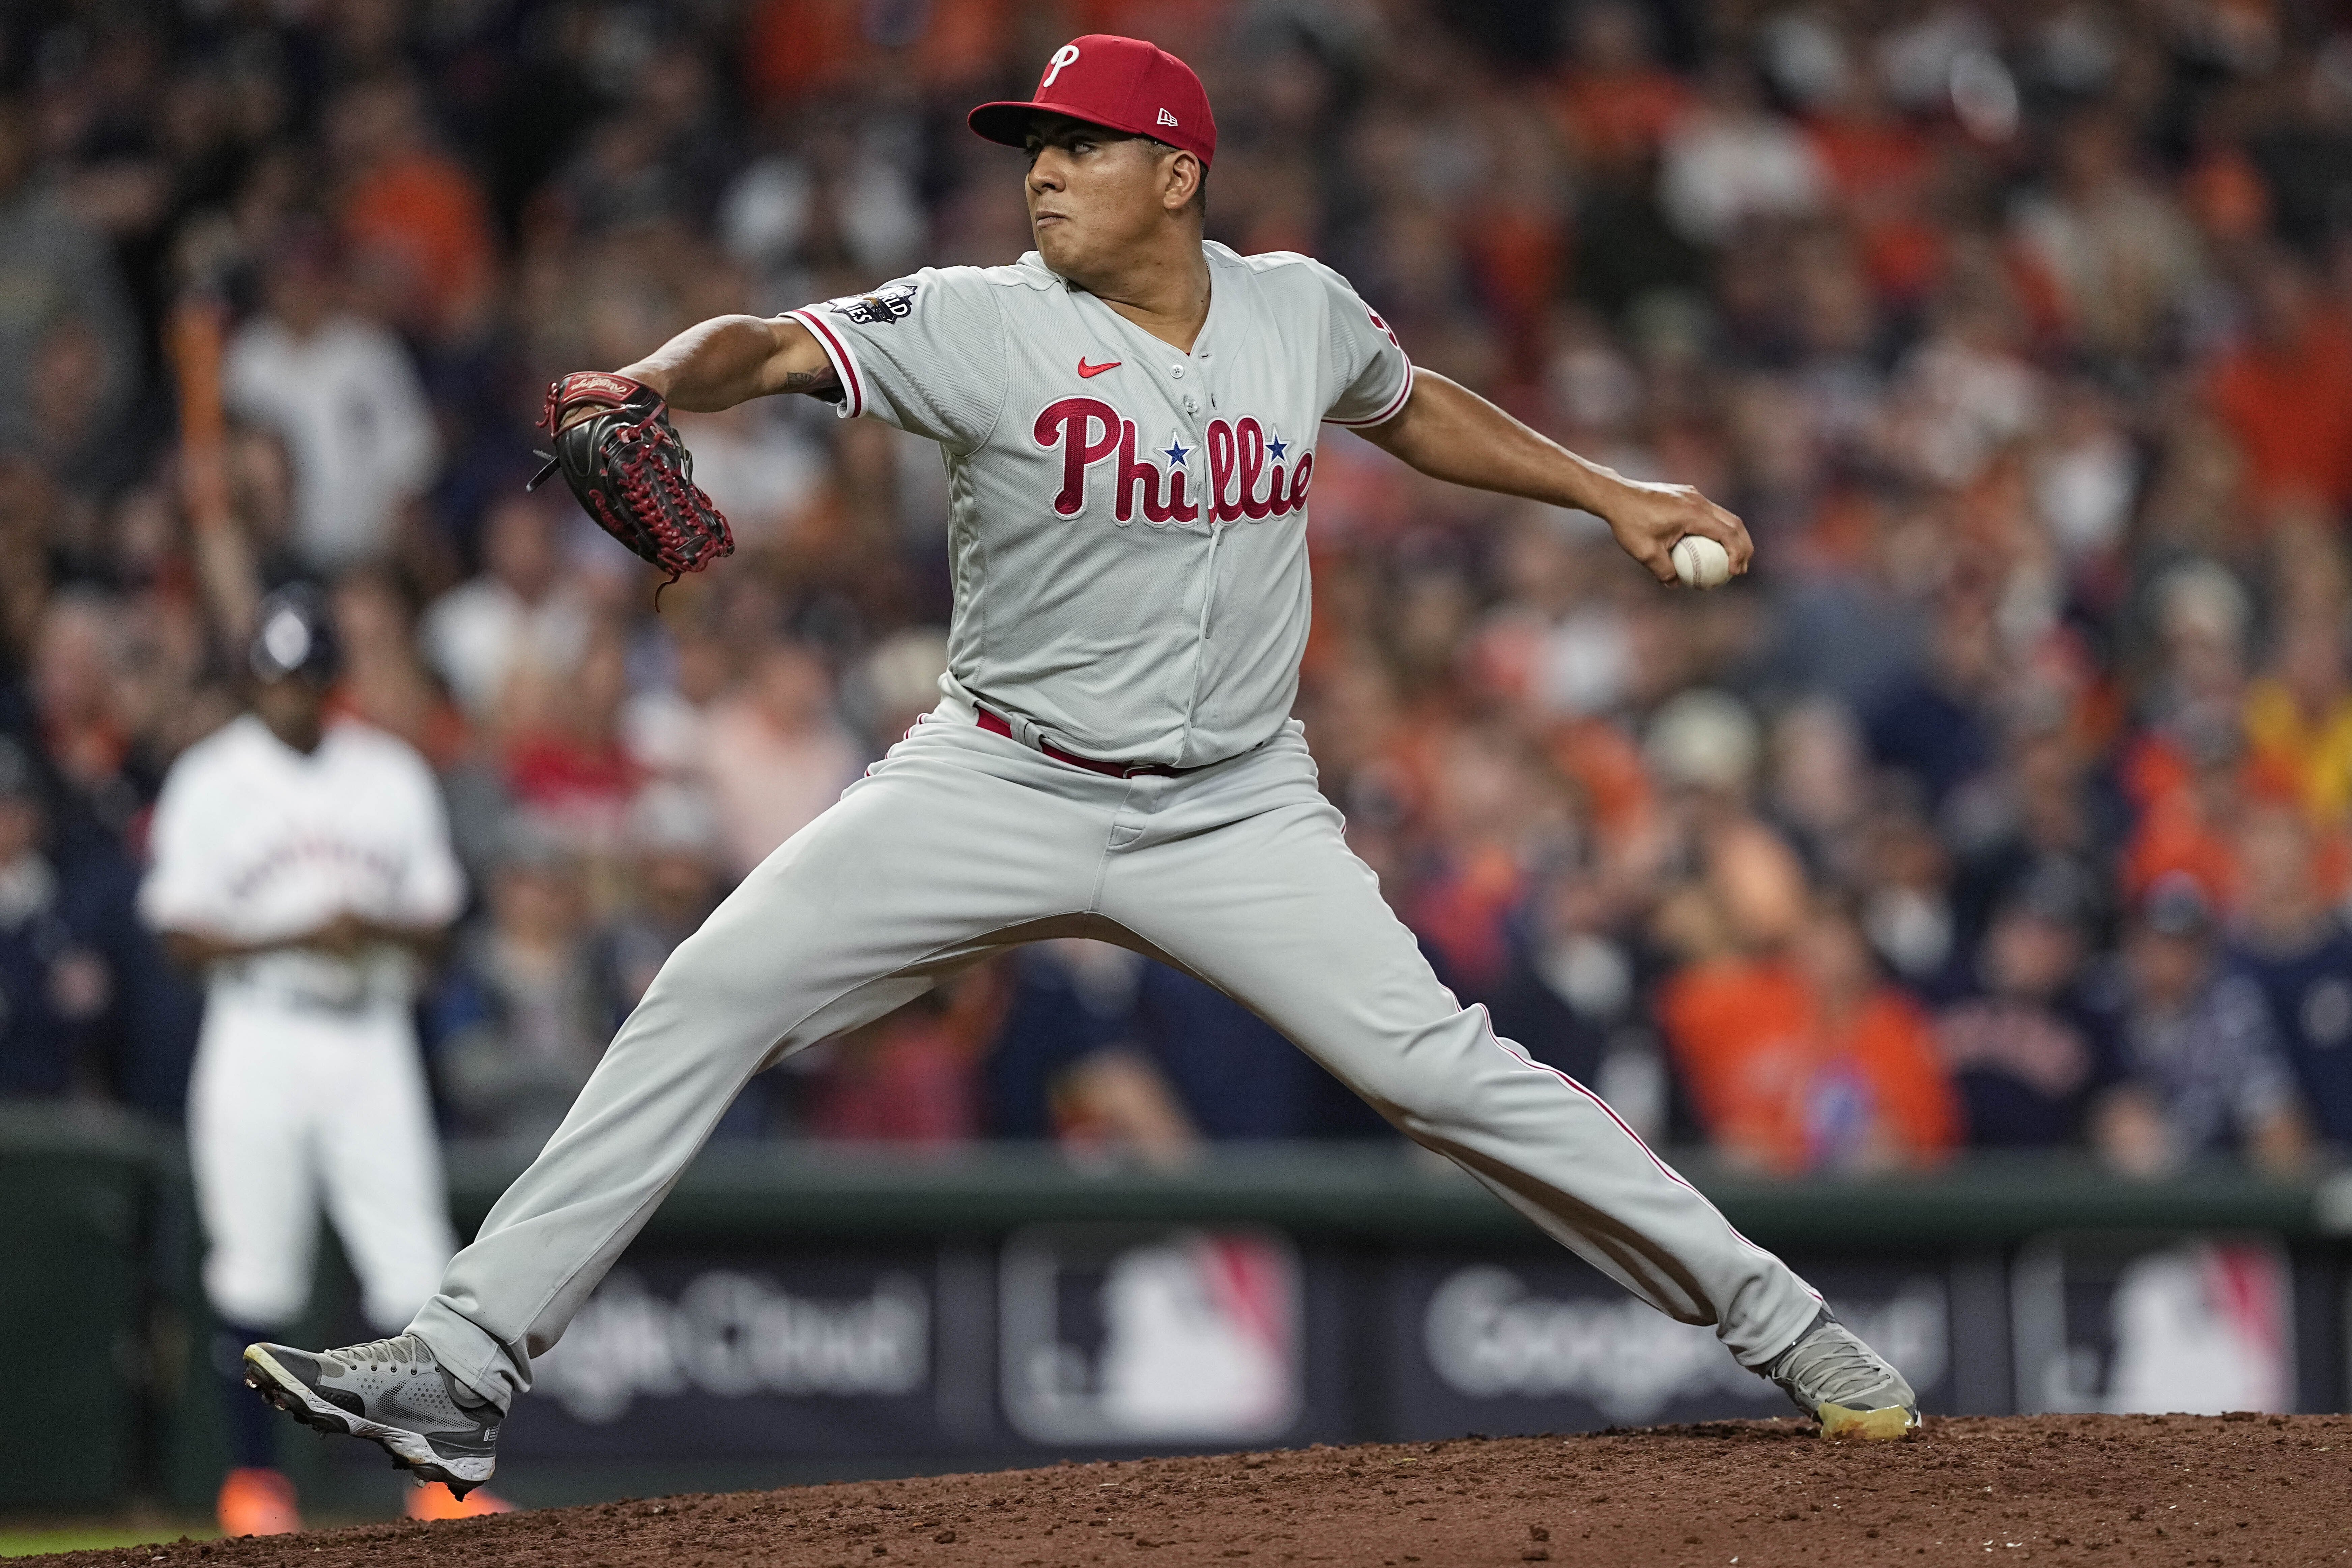 Houston Astros at Philadelphia Phillies free World Series Game 3 live stream (11/1/22) How to watch, time, channel, betting odds